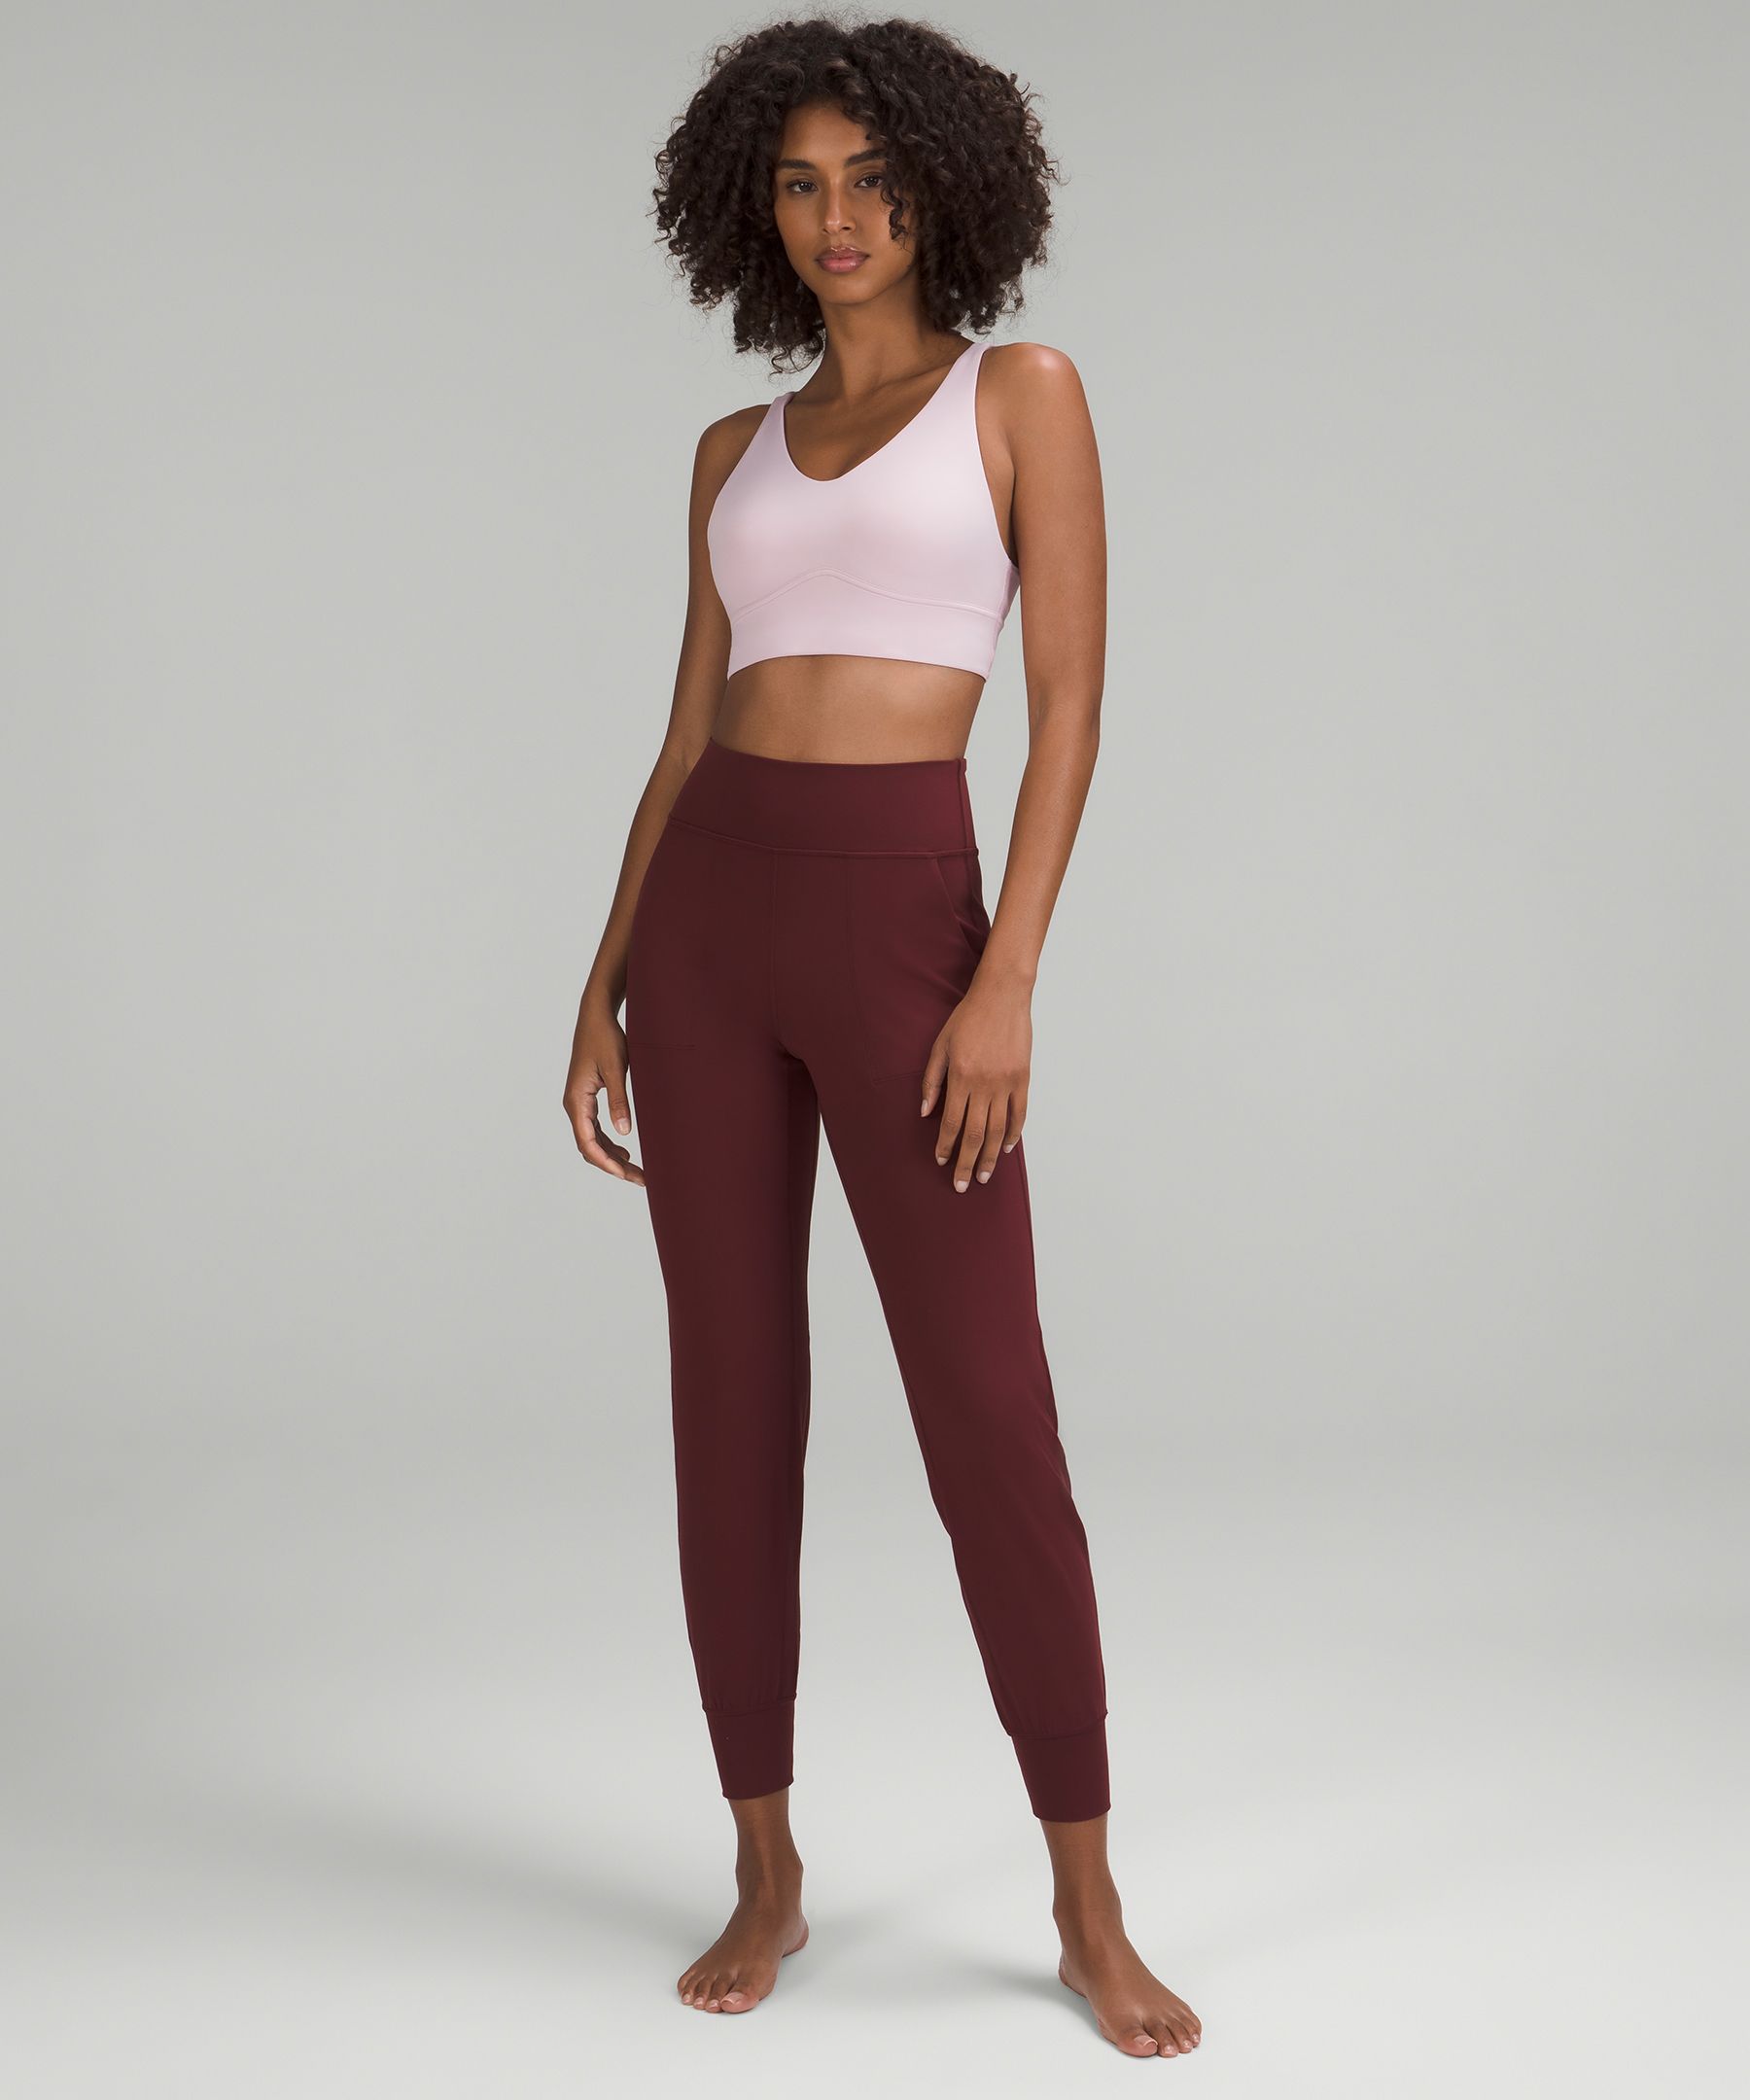 In Alignment Longline Bra *Light Support, B/C Cup